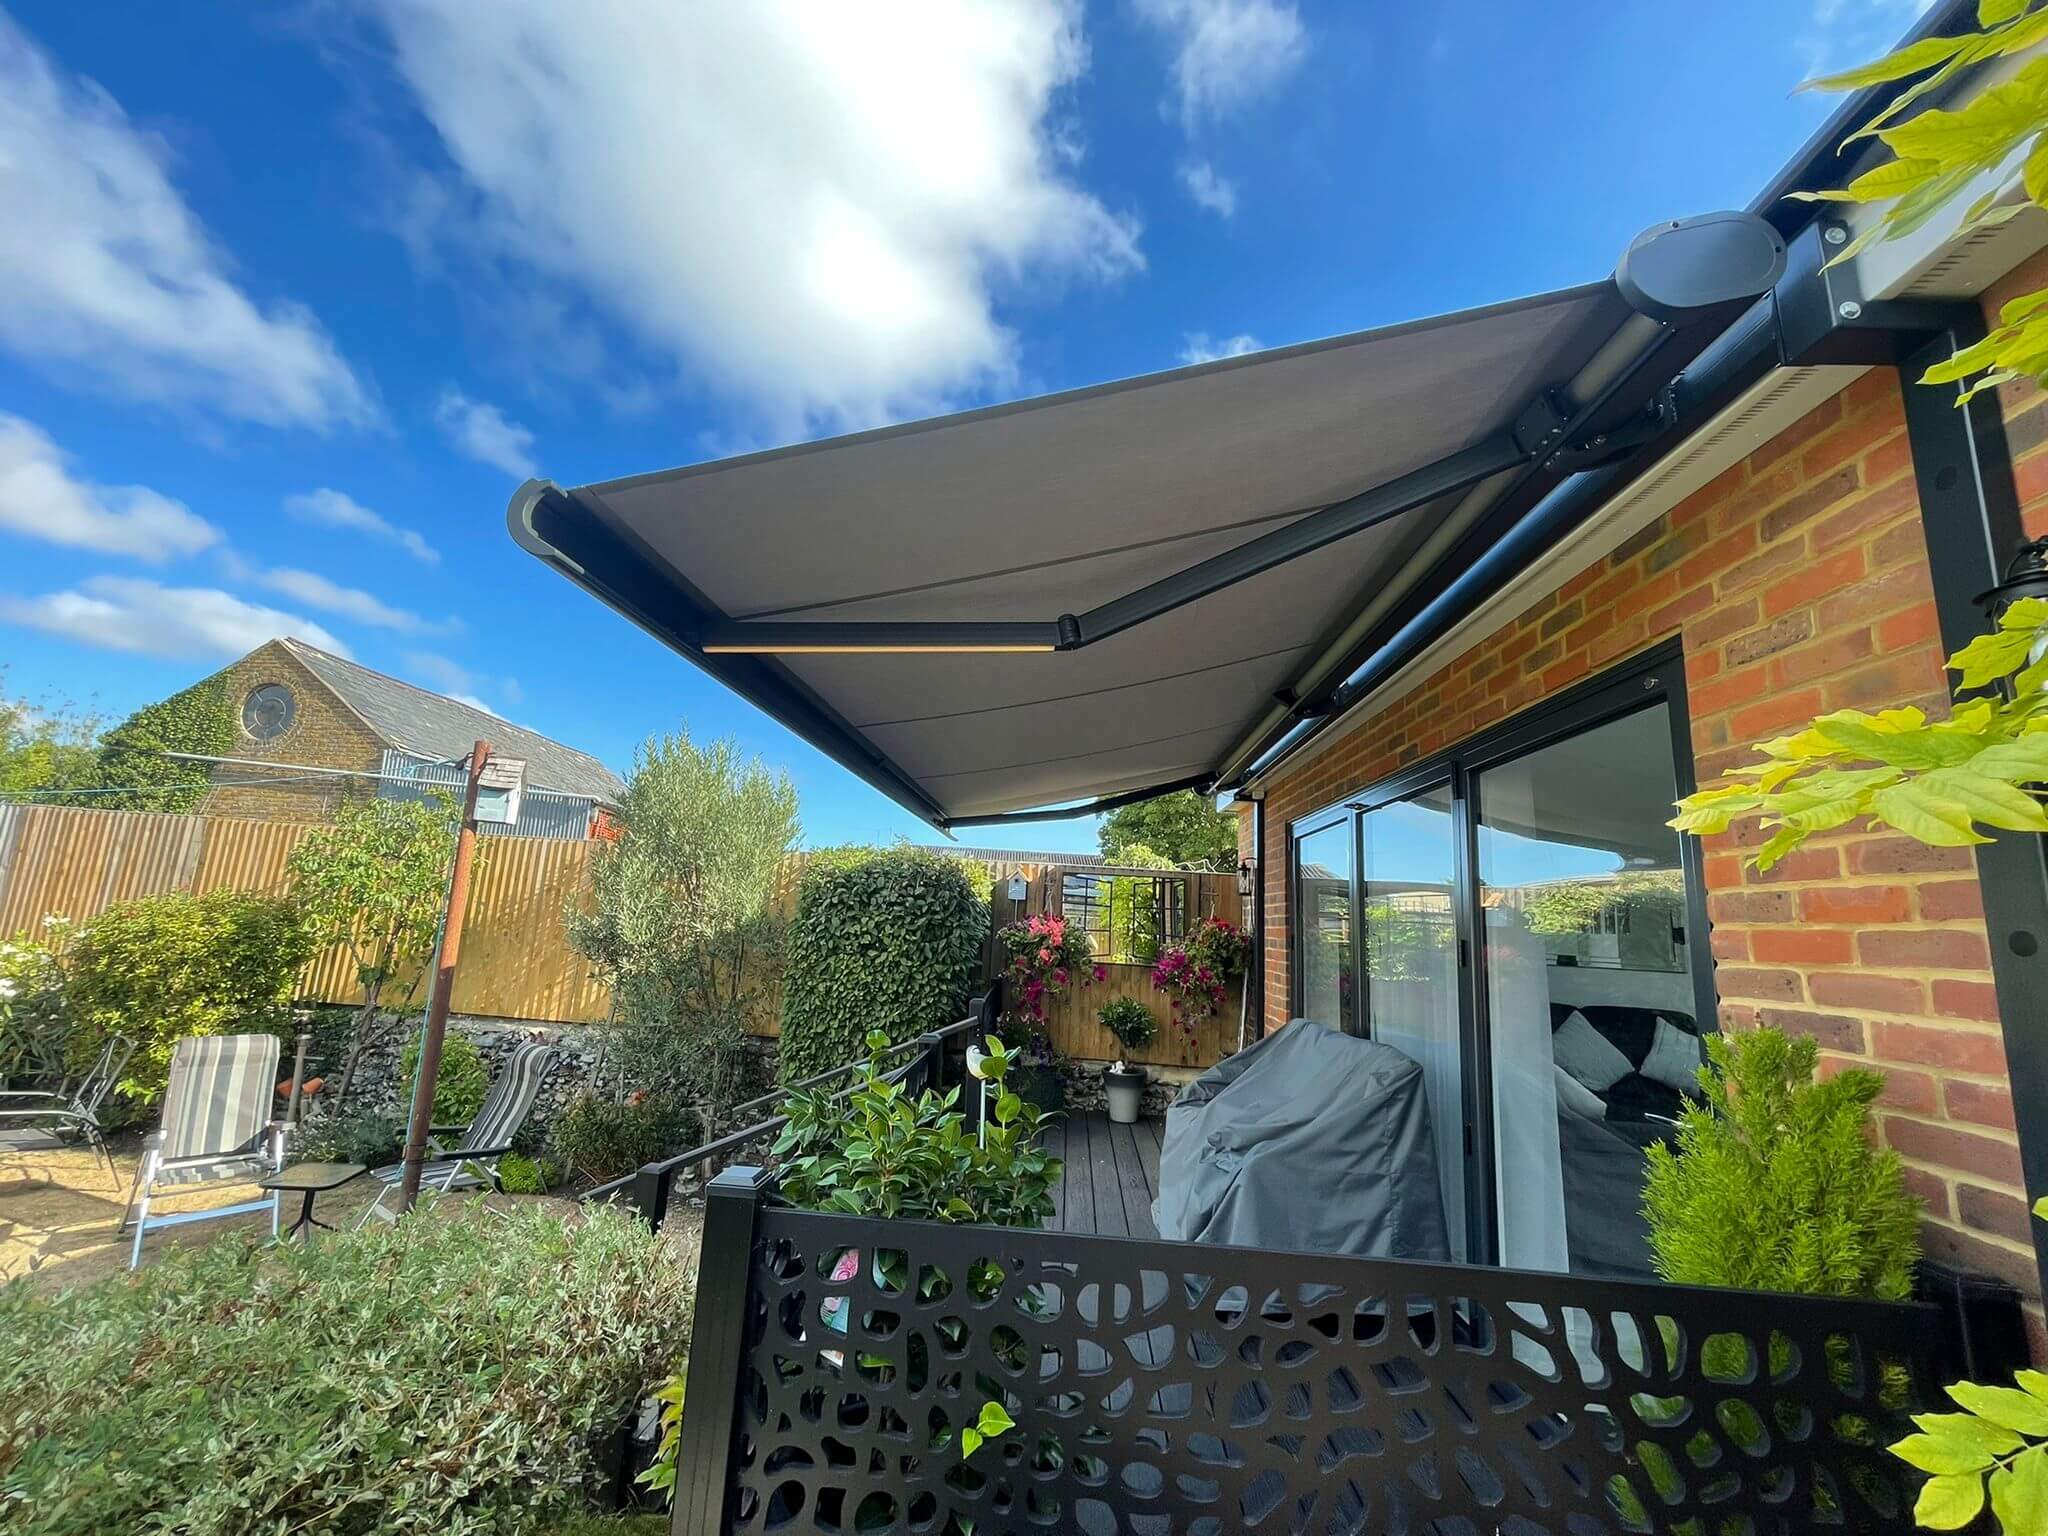 Canopies and awnings in garden